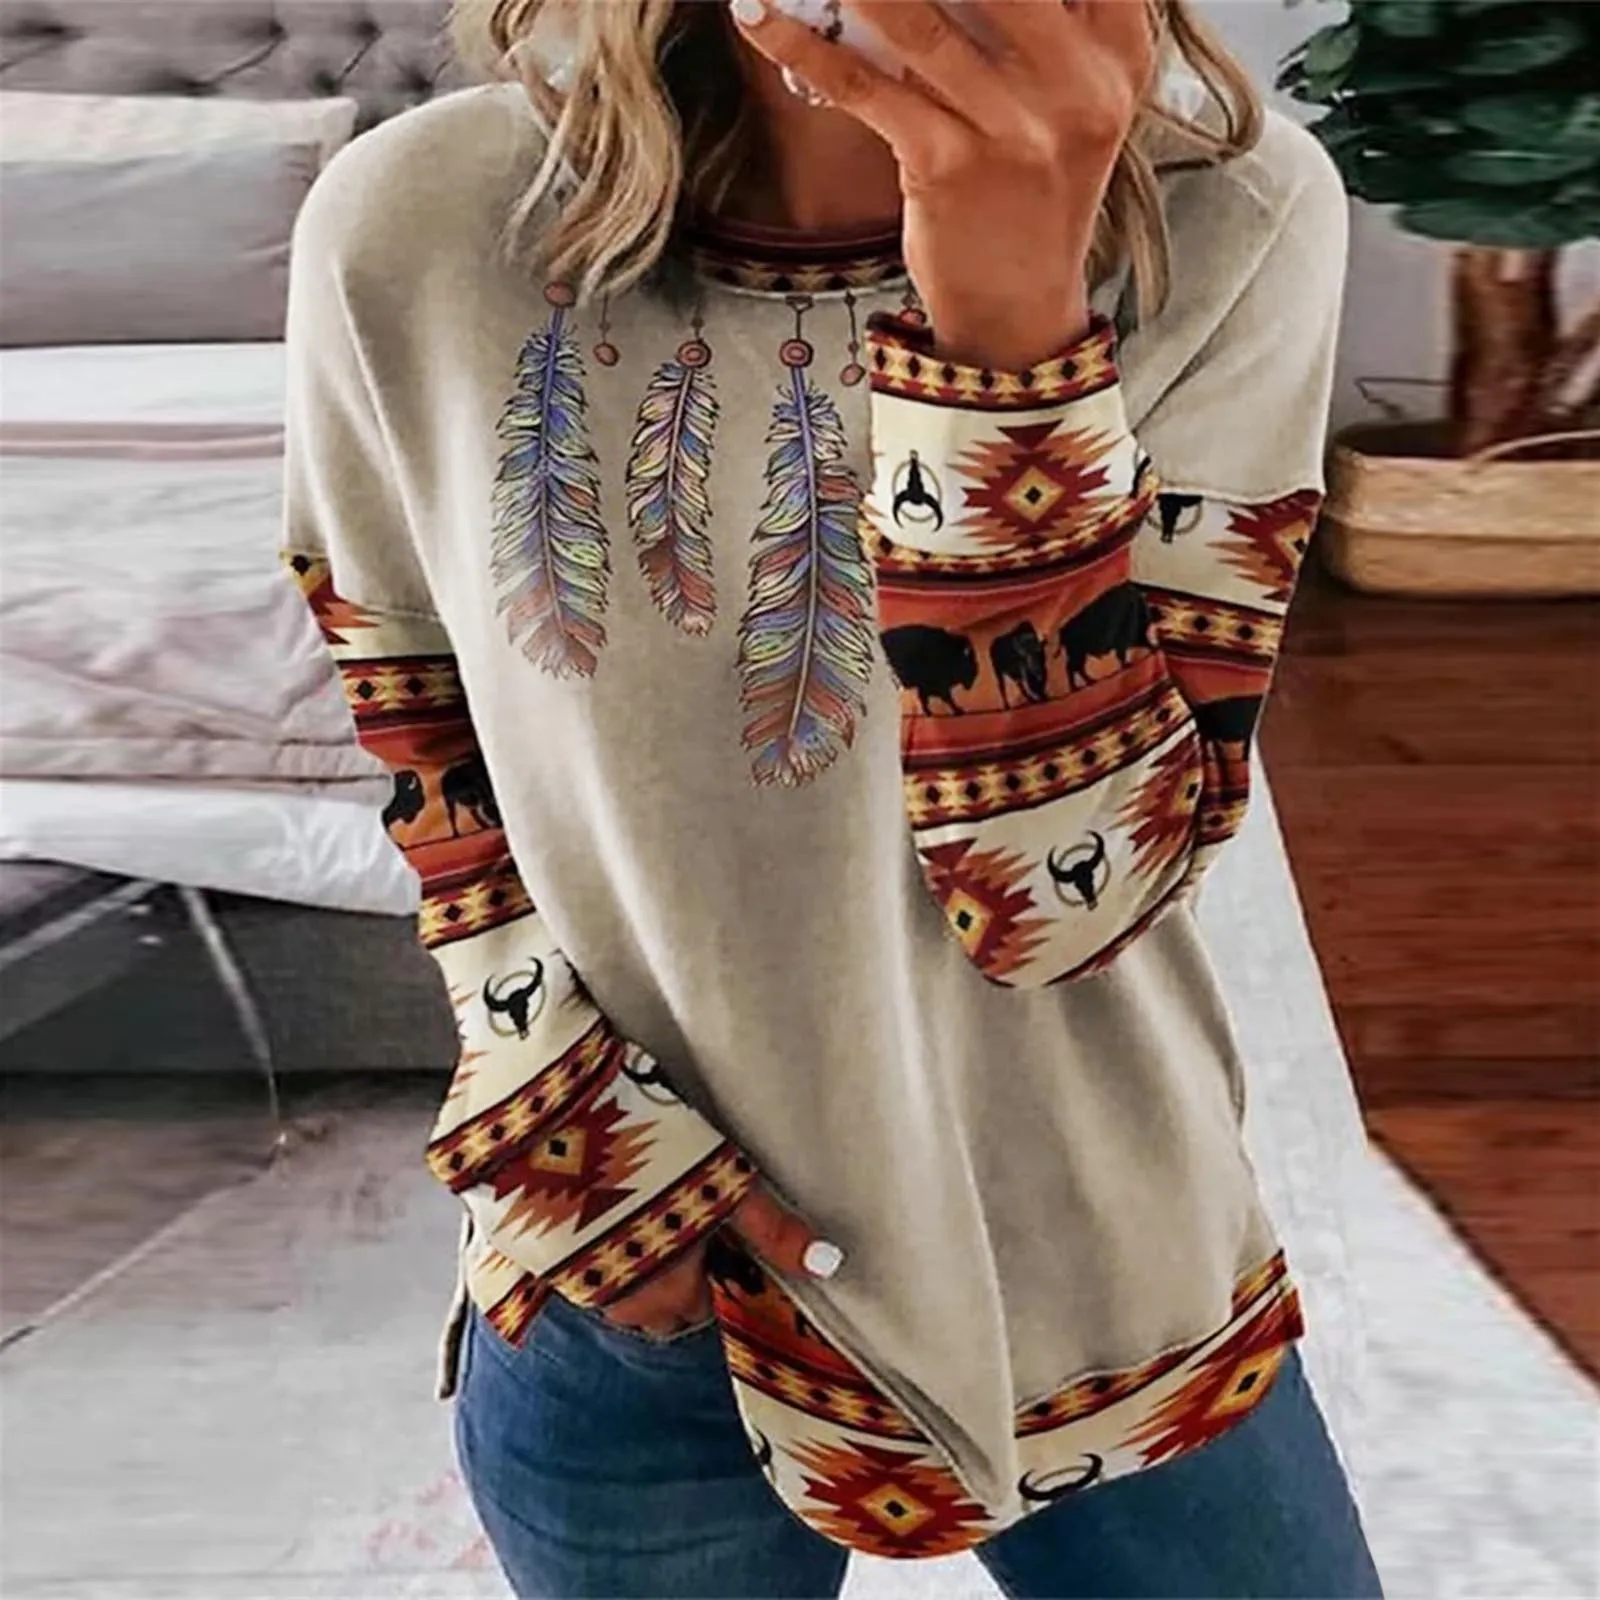 Vintage Print Round Neck Sweatshirt Womens Blouse Indian Feather Aztec Printed Long Sleeve Pullover Fall Long Sleeve Casual Top